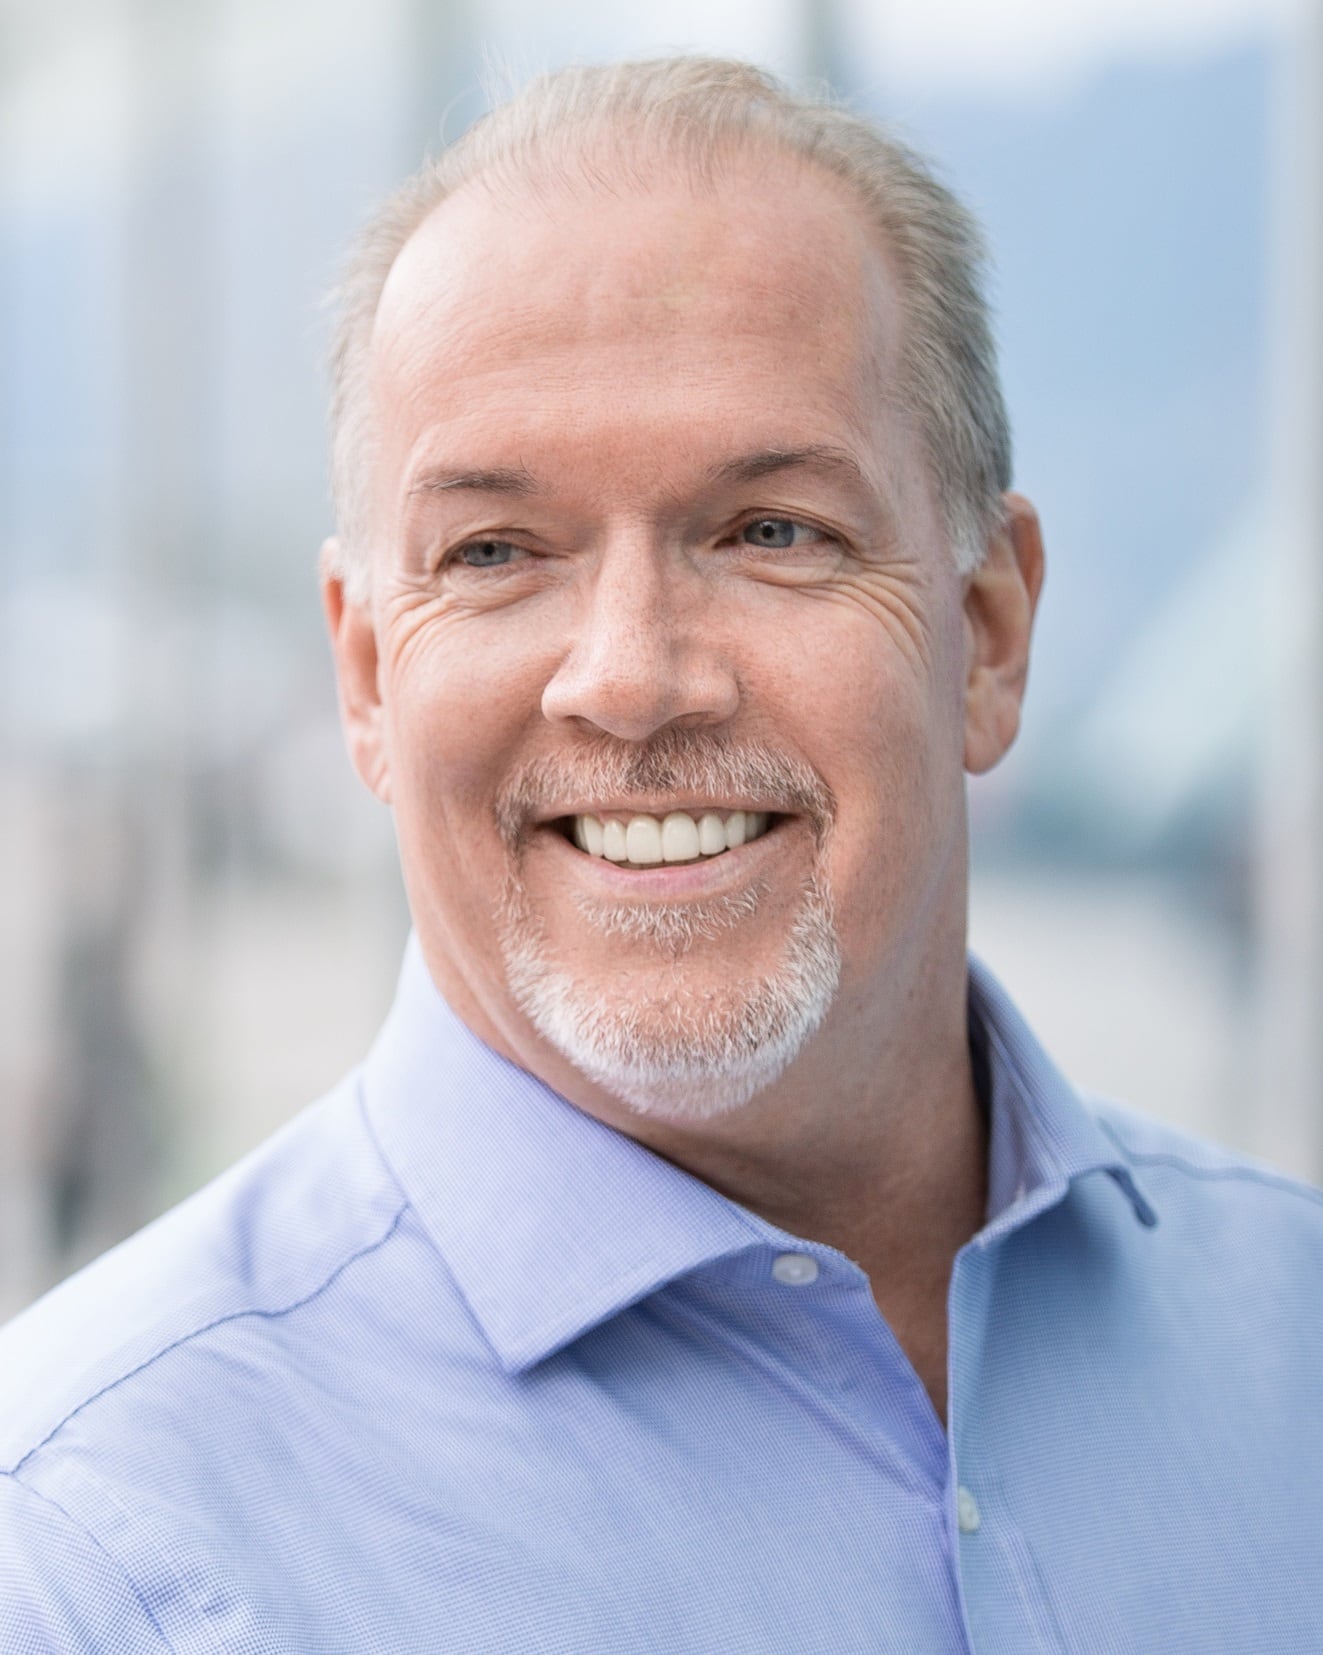 Premier Horgan to get surgery to remove lump Friday